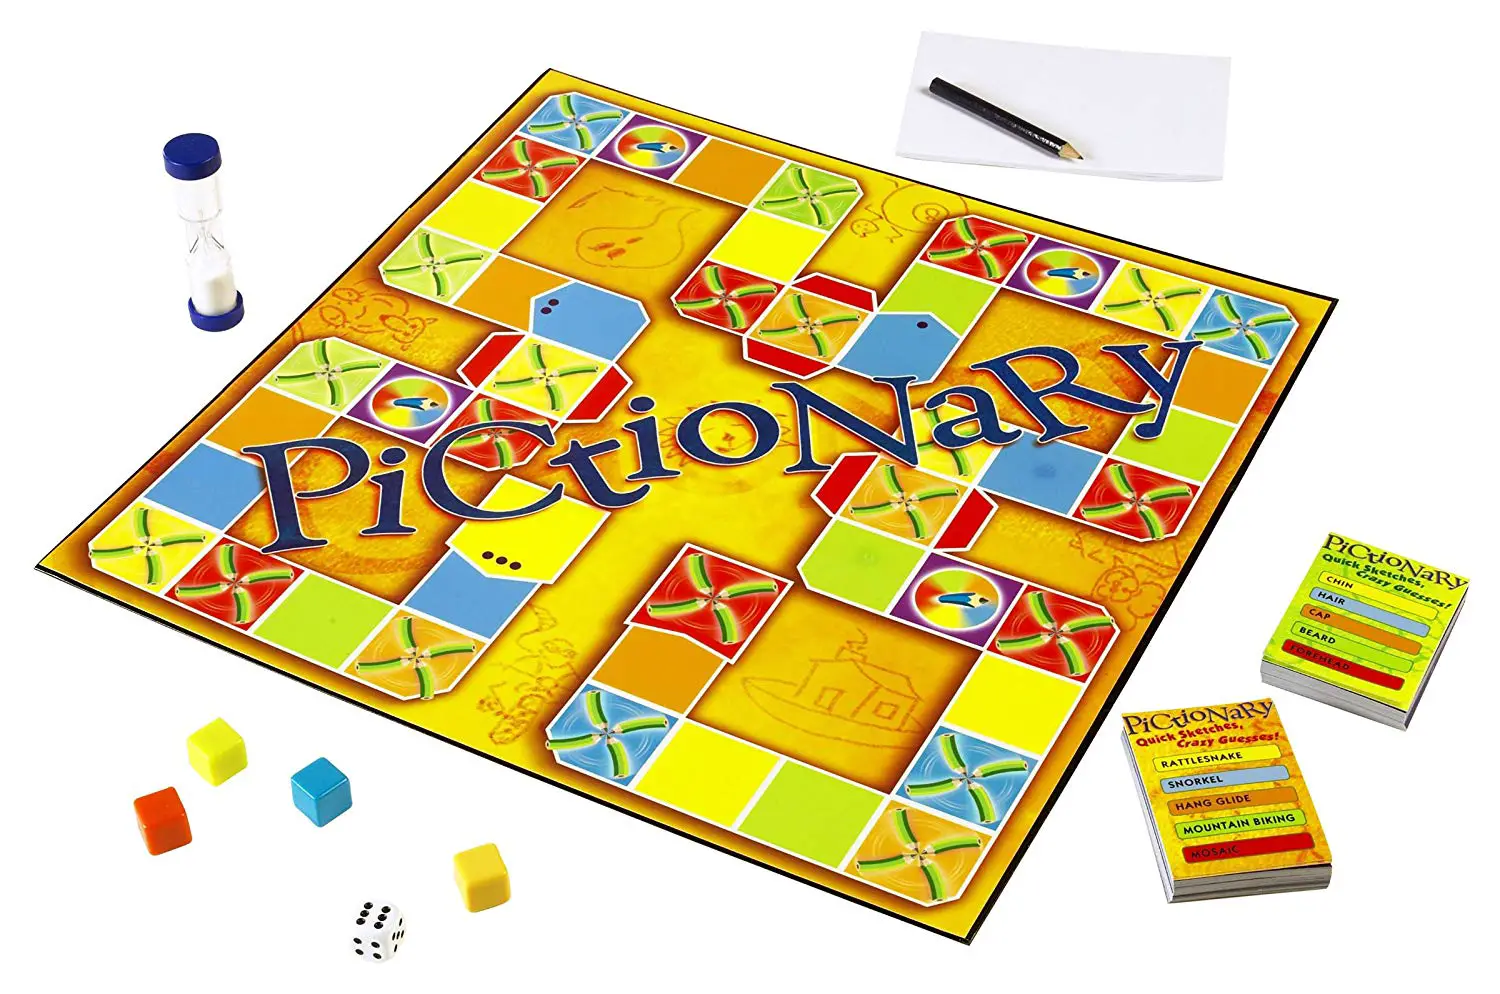 800+ Pictionary Words: Easy, Hard, Funny, Dirty List